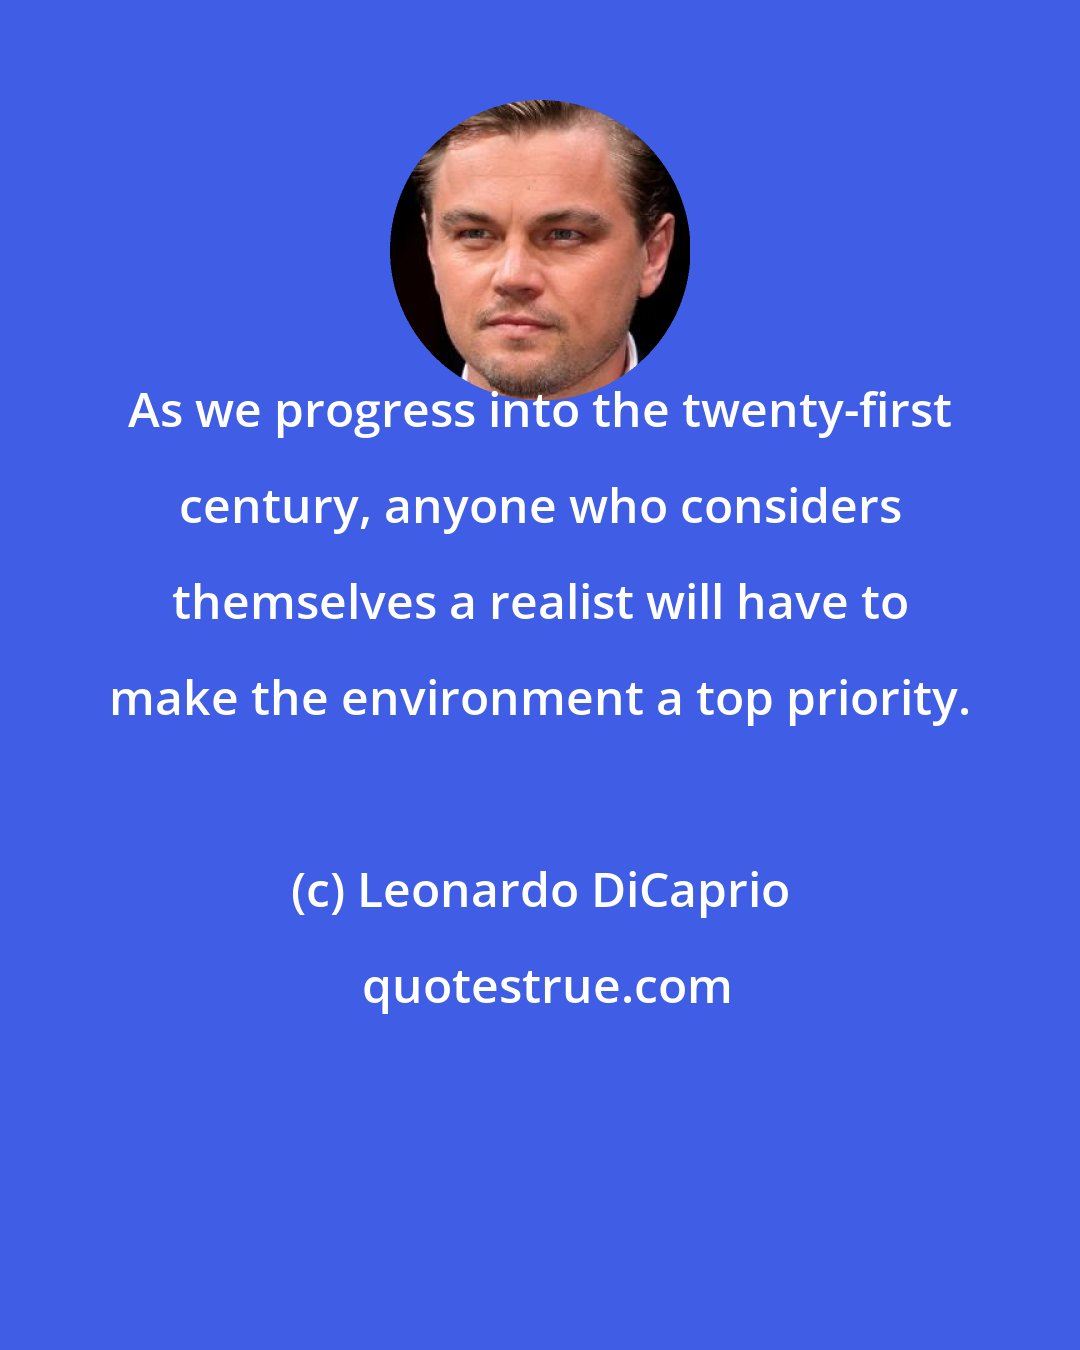 Leonardo DiCaprio: As we progress into the twenty-first century, anyone who considers themselves a realist will have to make the environment a top priority.